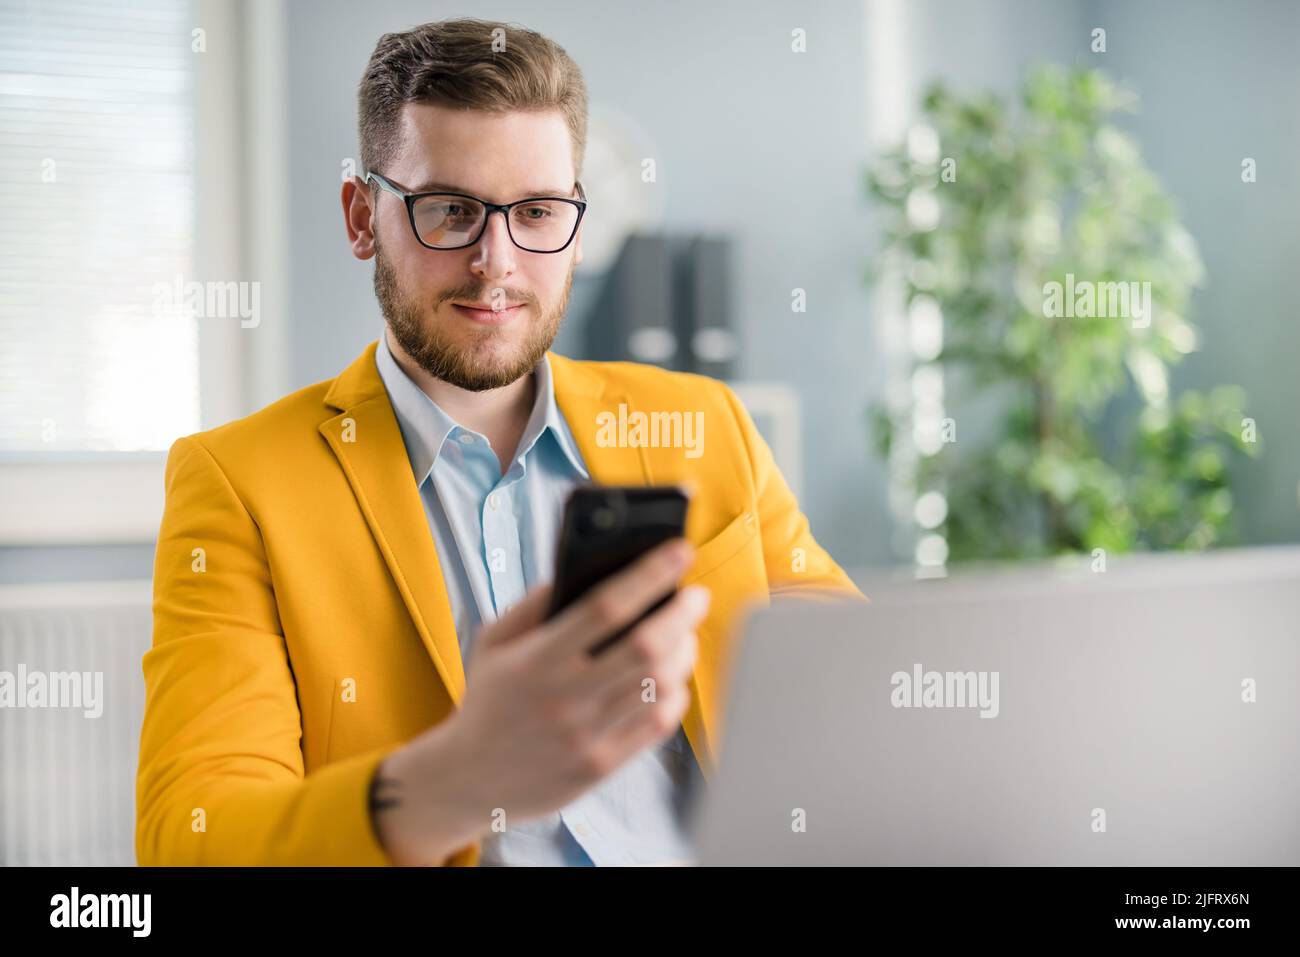 Male sitting at workplace with smartphone Stock Photo